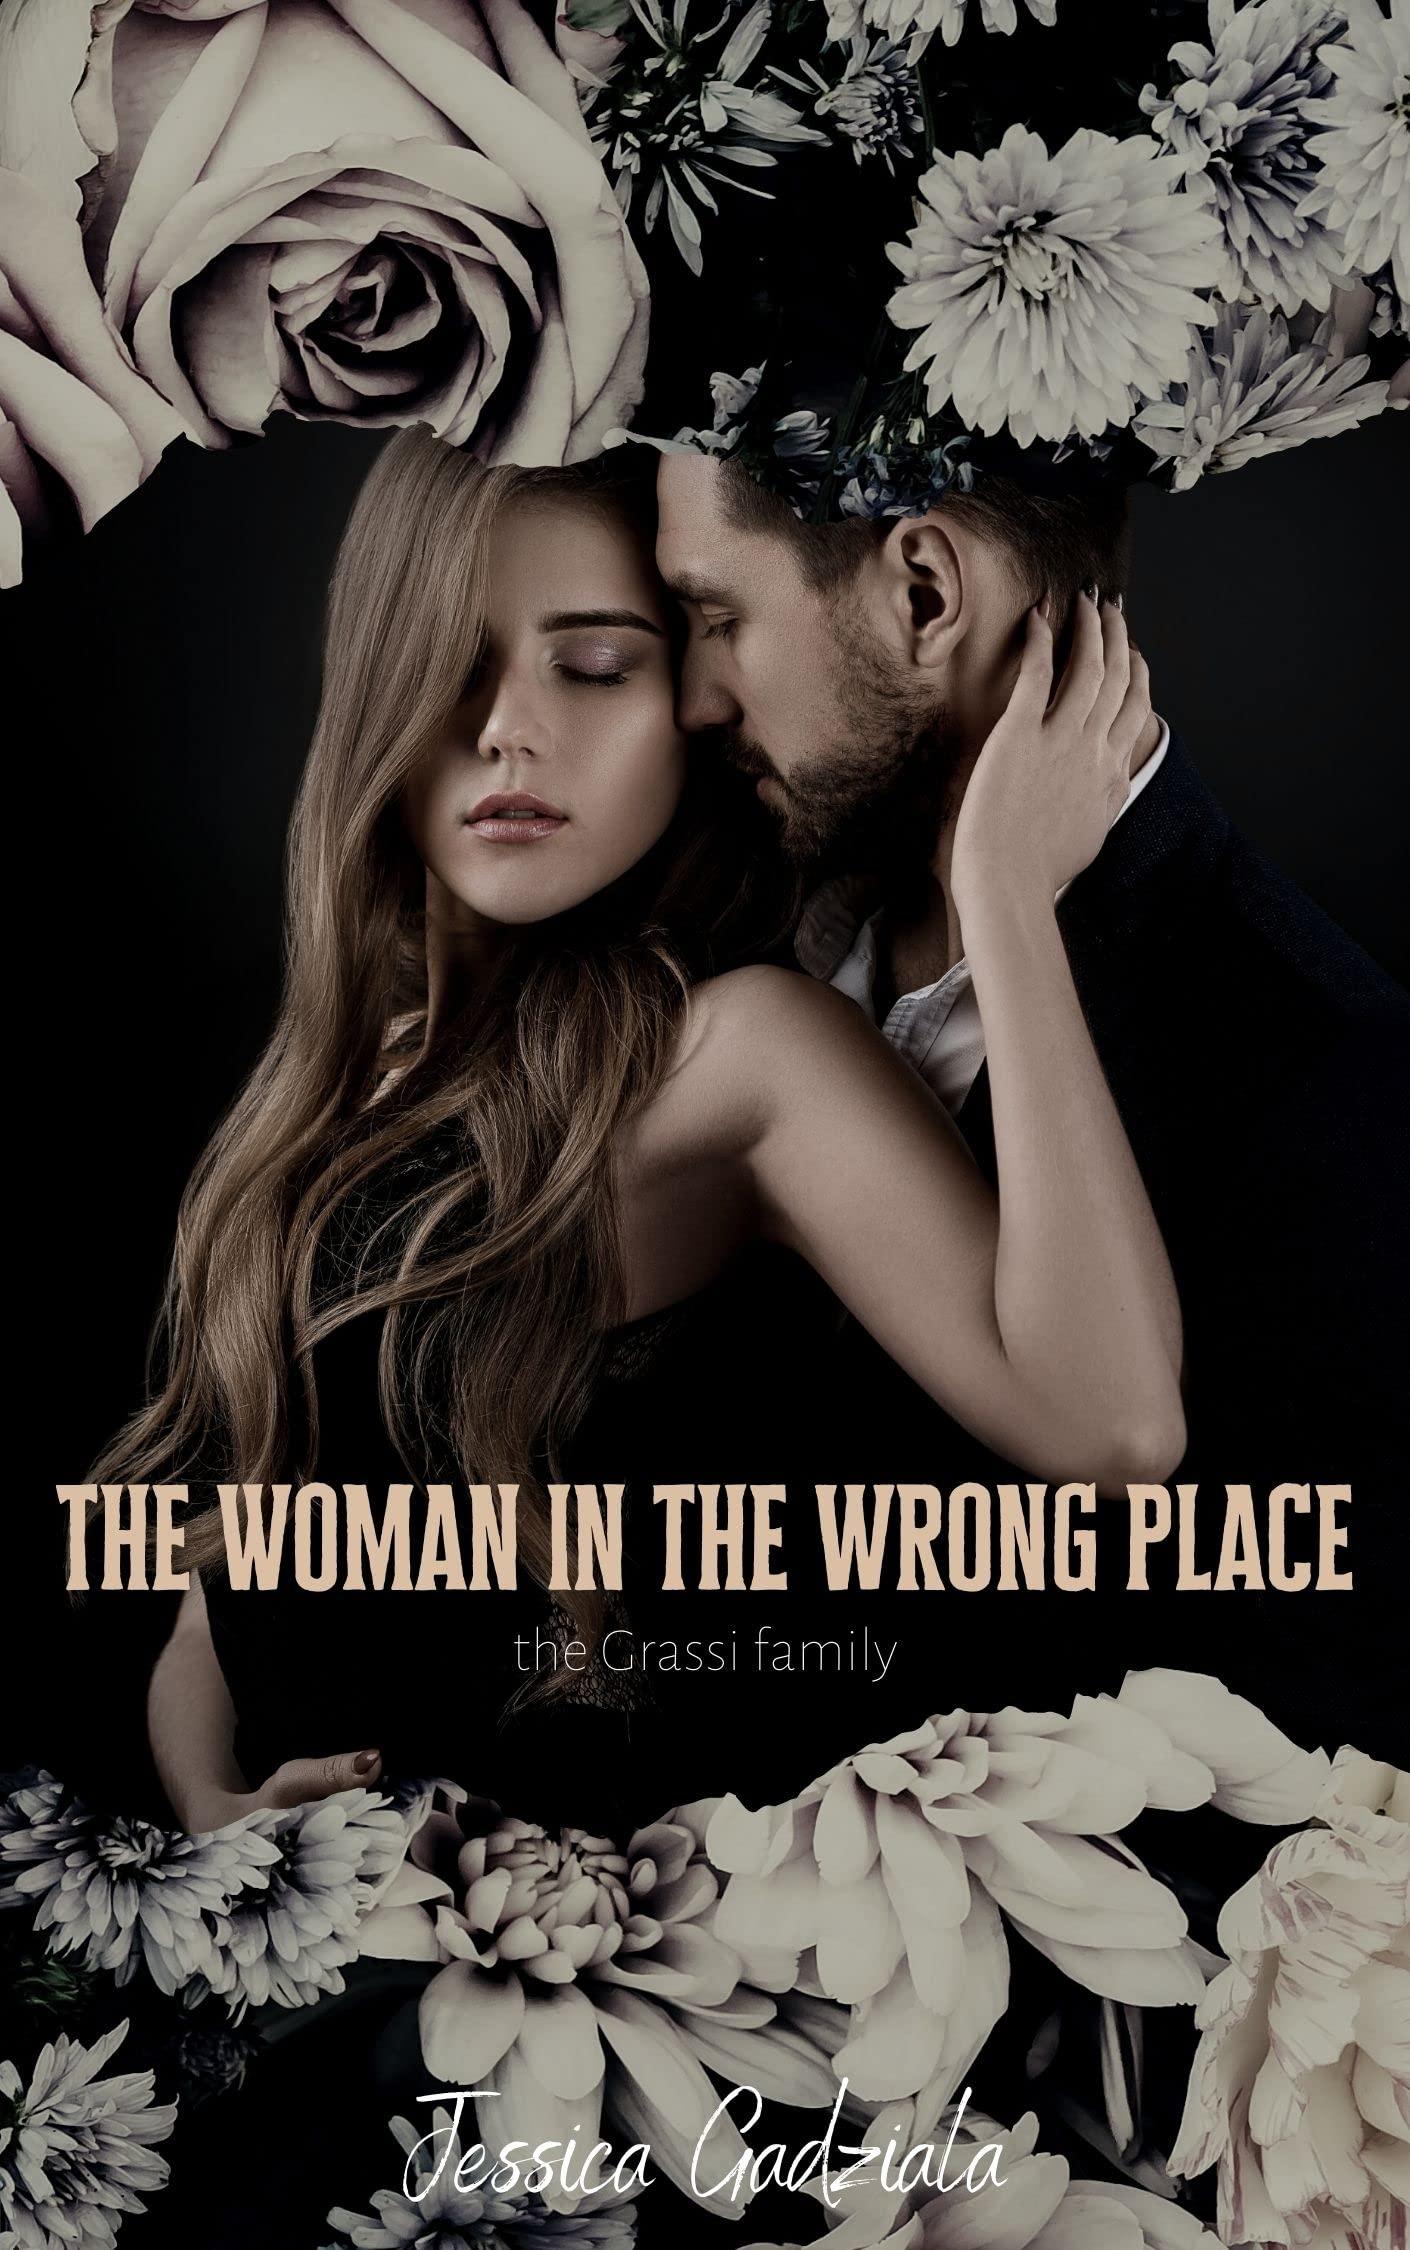 The Woman in the Wrong Place